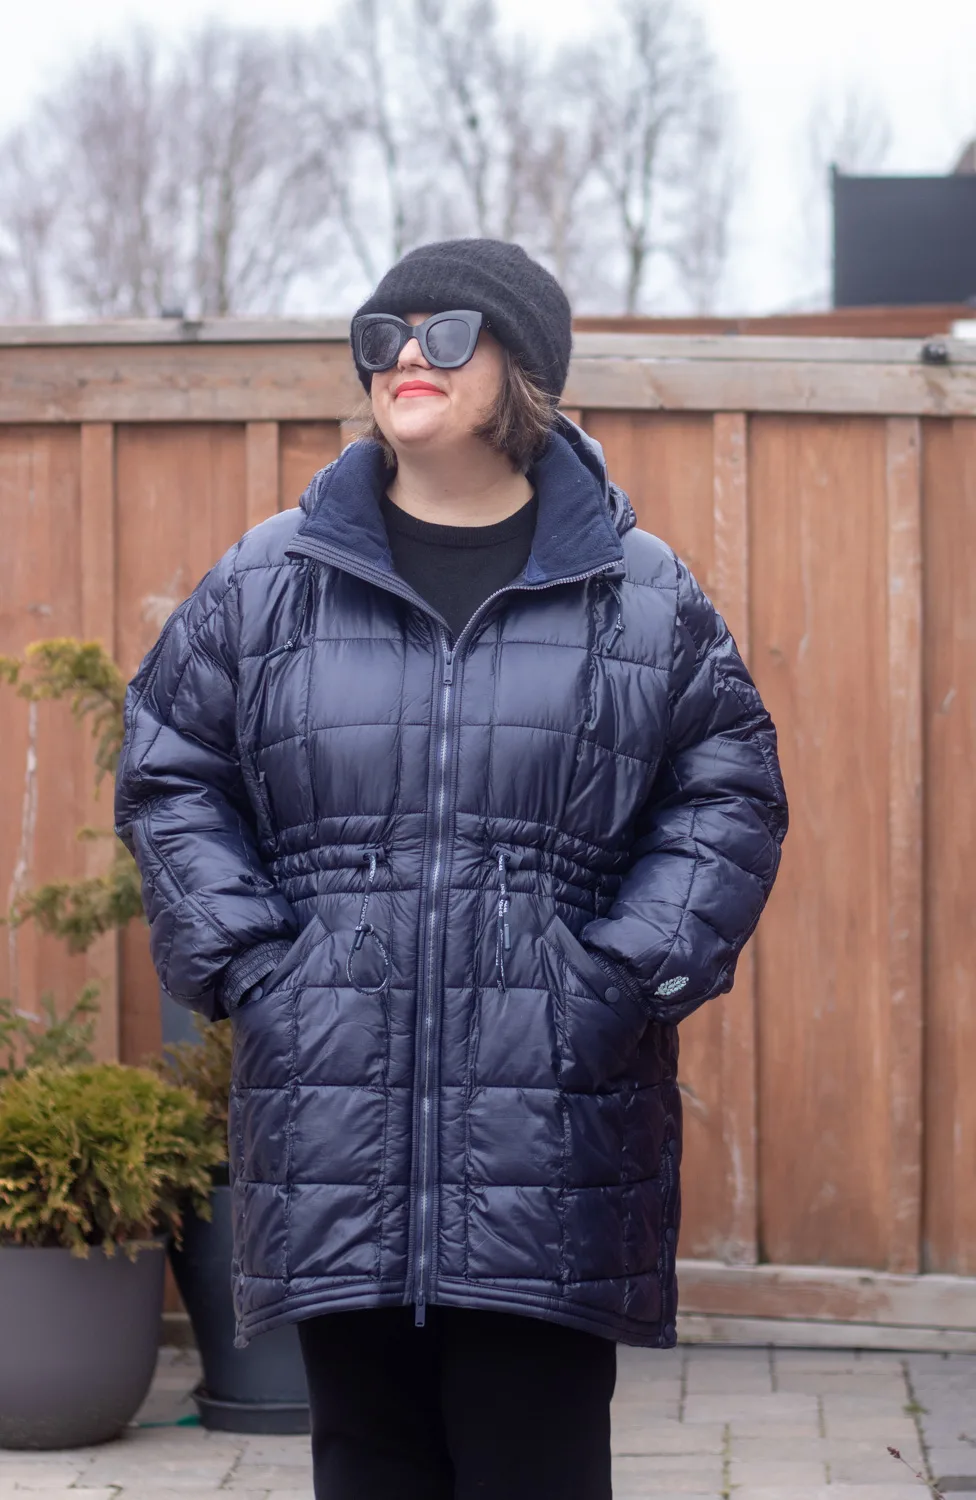 Patricia Packable Poncho puffer review